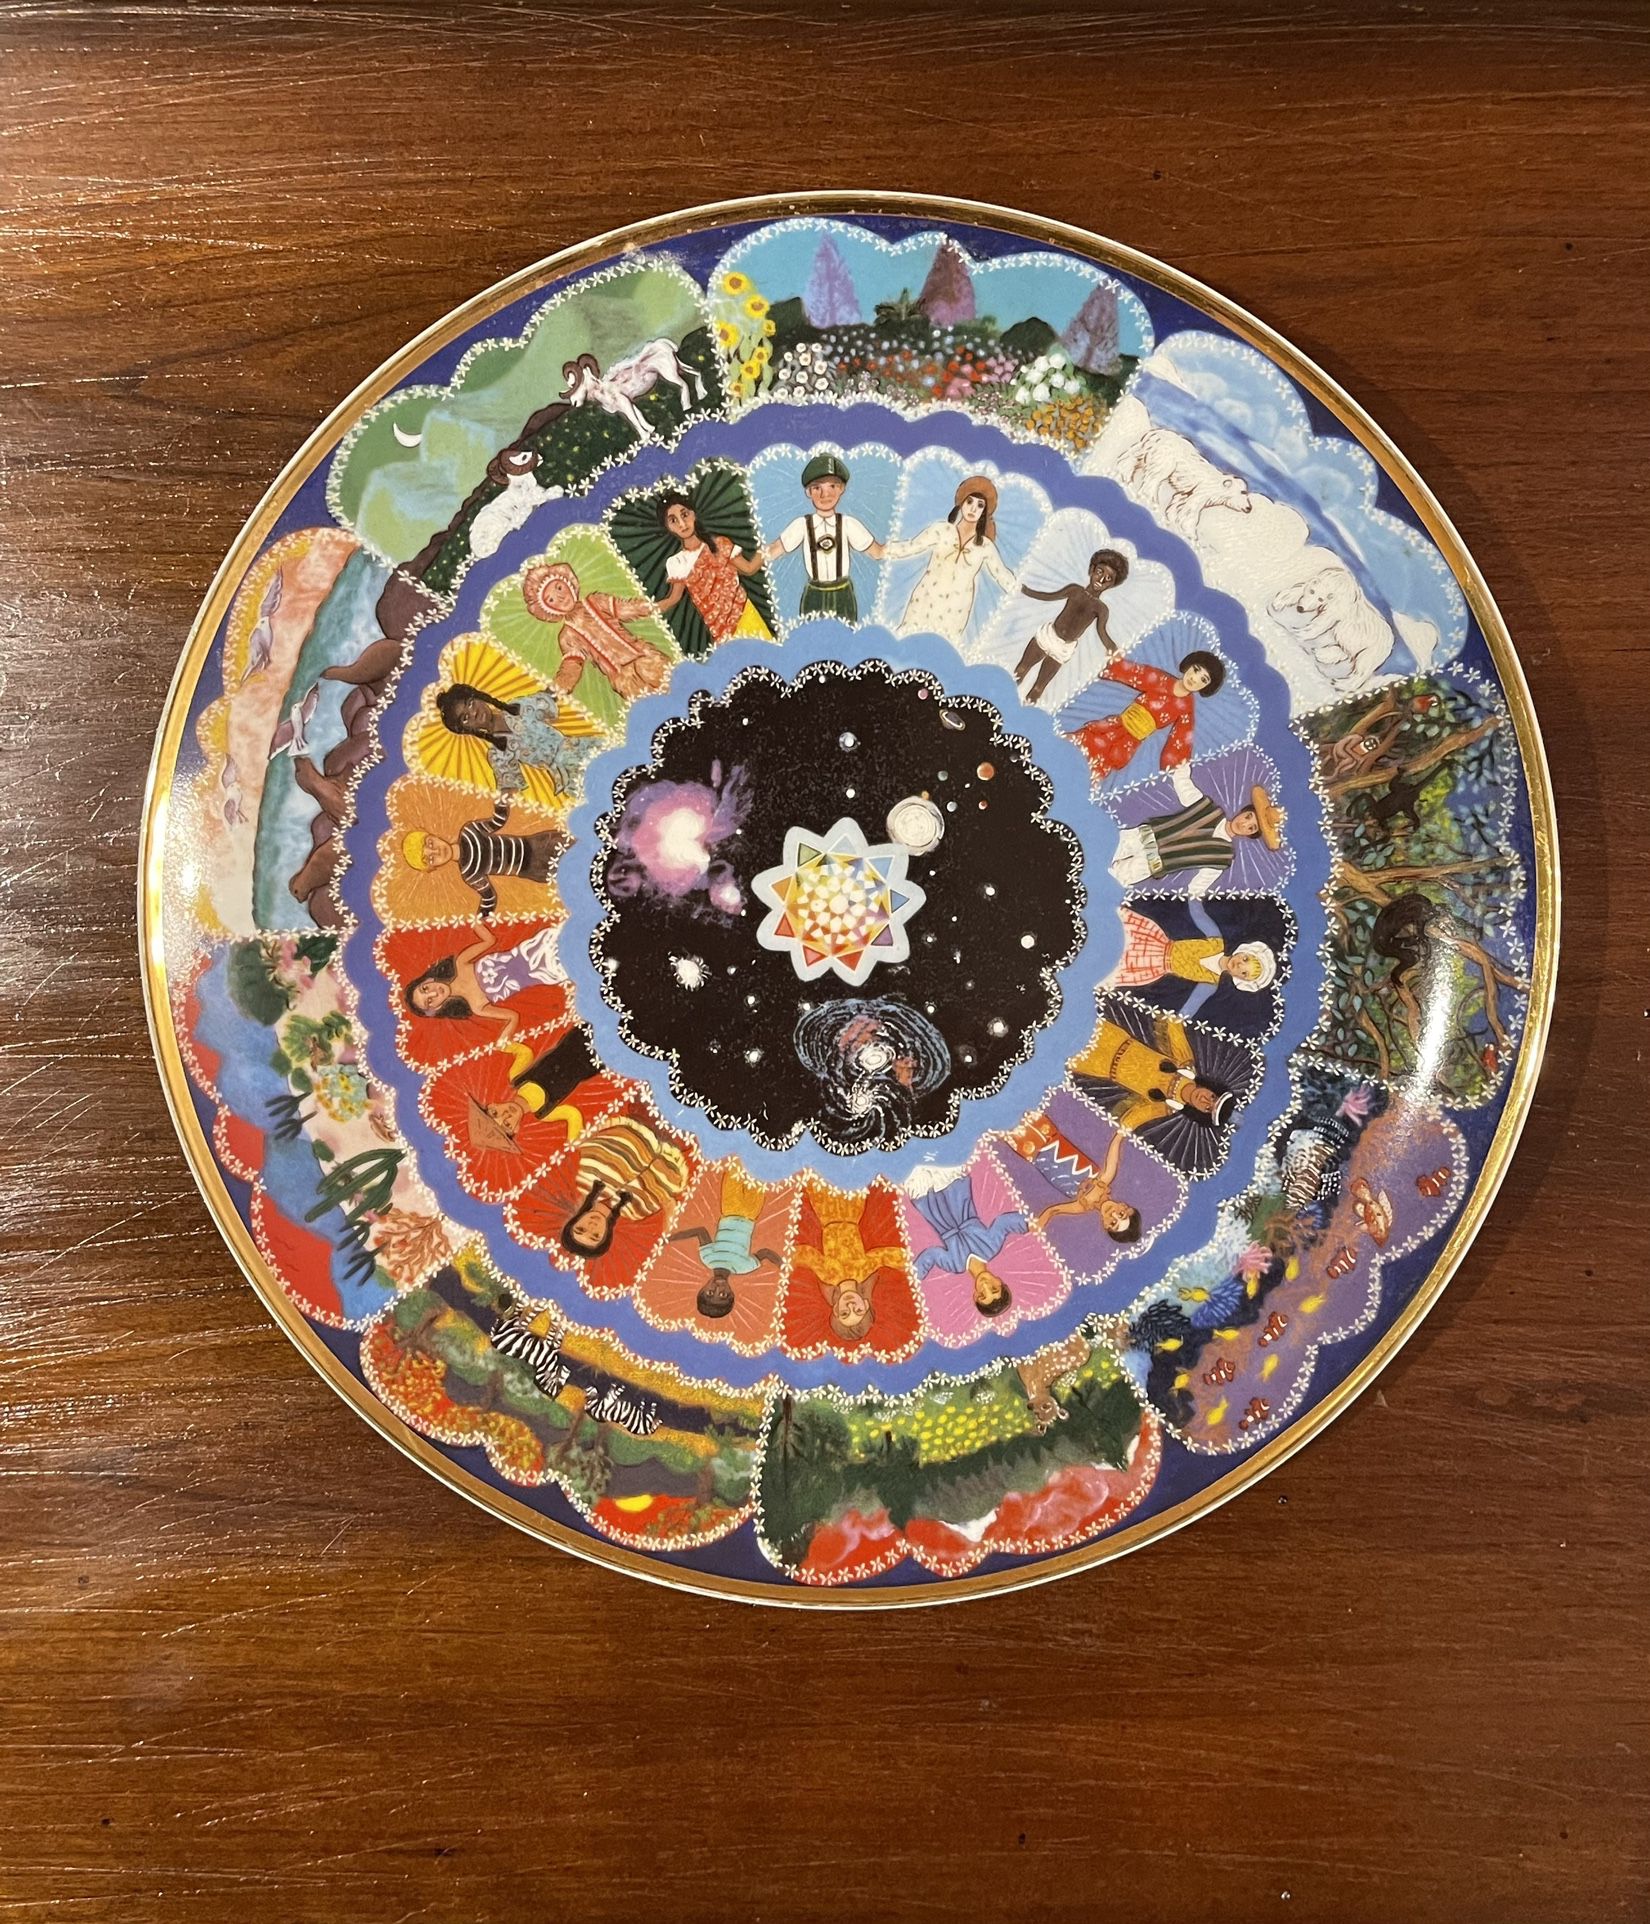 UNICEF Plate Collectors “ The Earth Is But One Country “ First Edition 1980’s